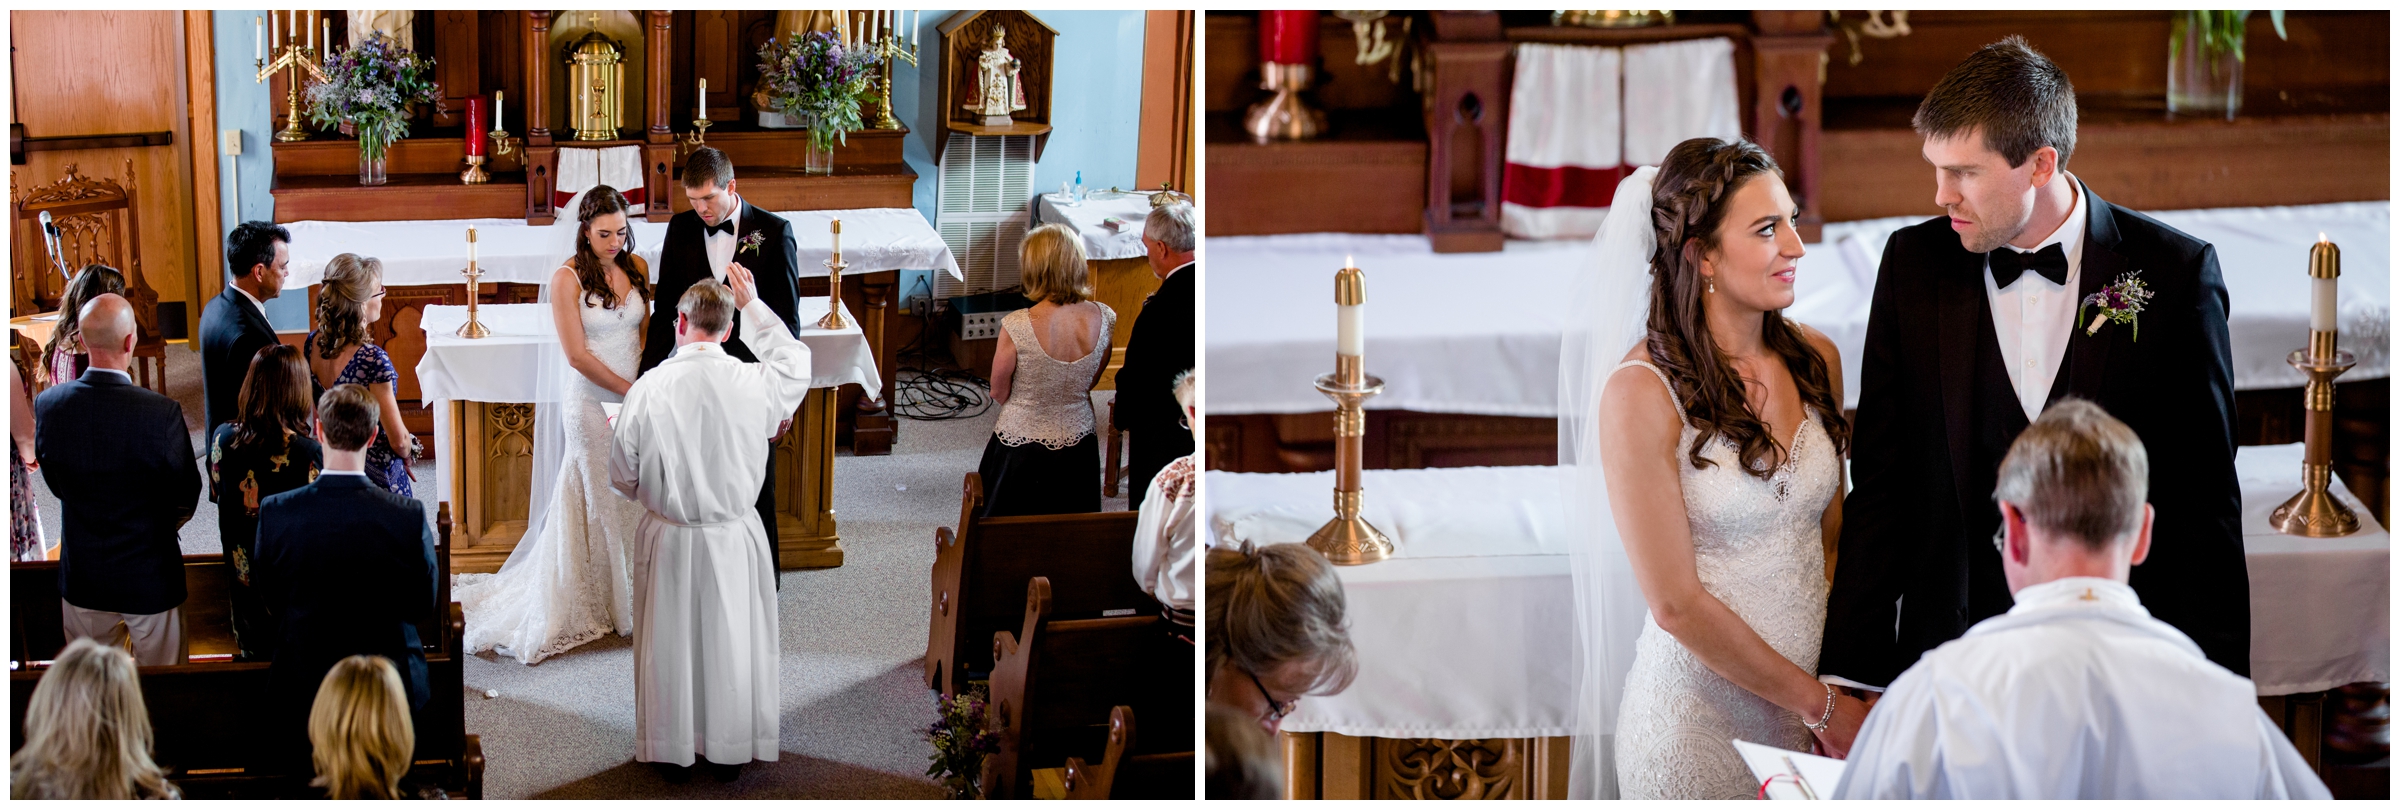 St. Mary's Catholic church ceremony in Colorado mountains 